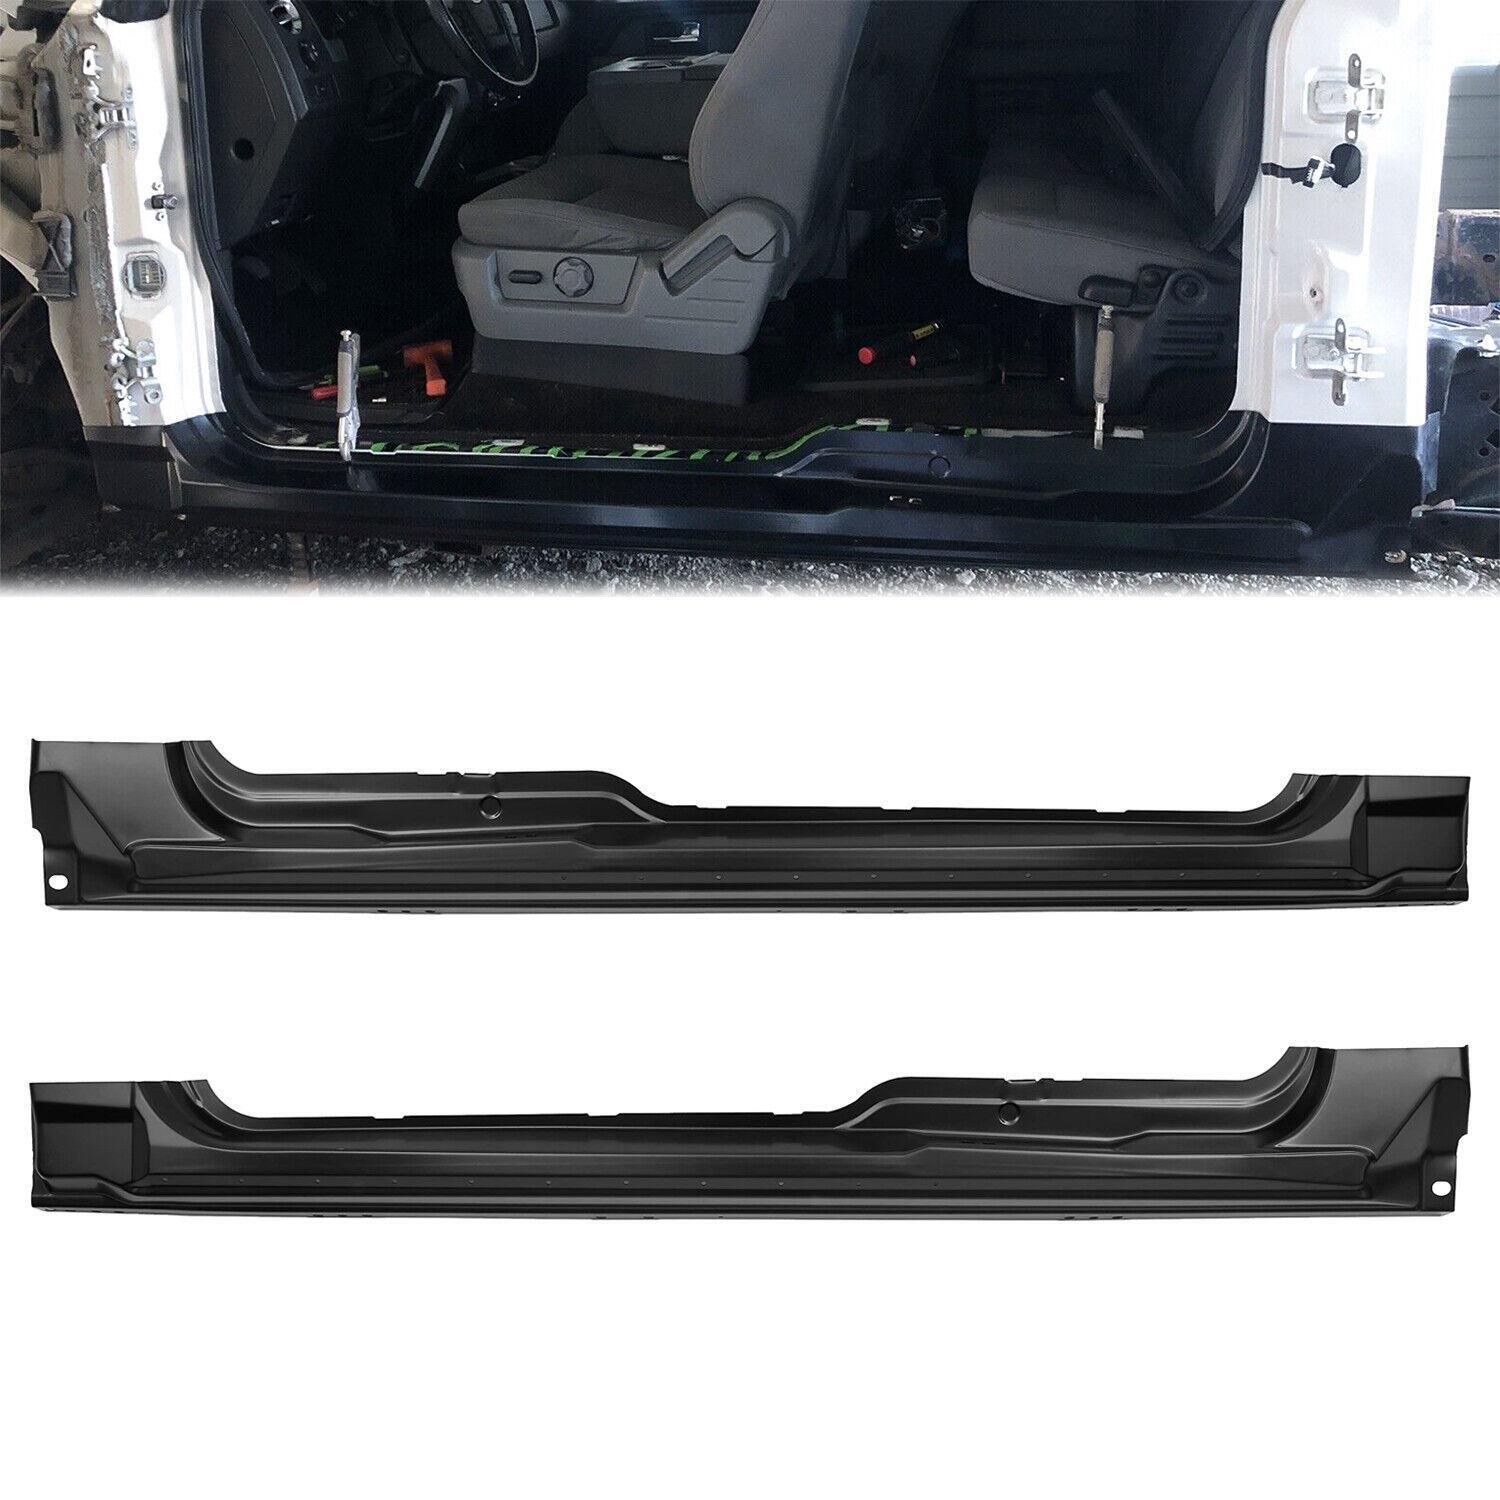 Factory Style Rocker Panel For Ford F150 Pickup Truck Super/Extended Cab 09-14